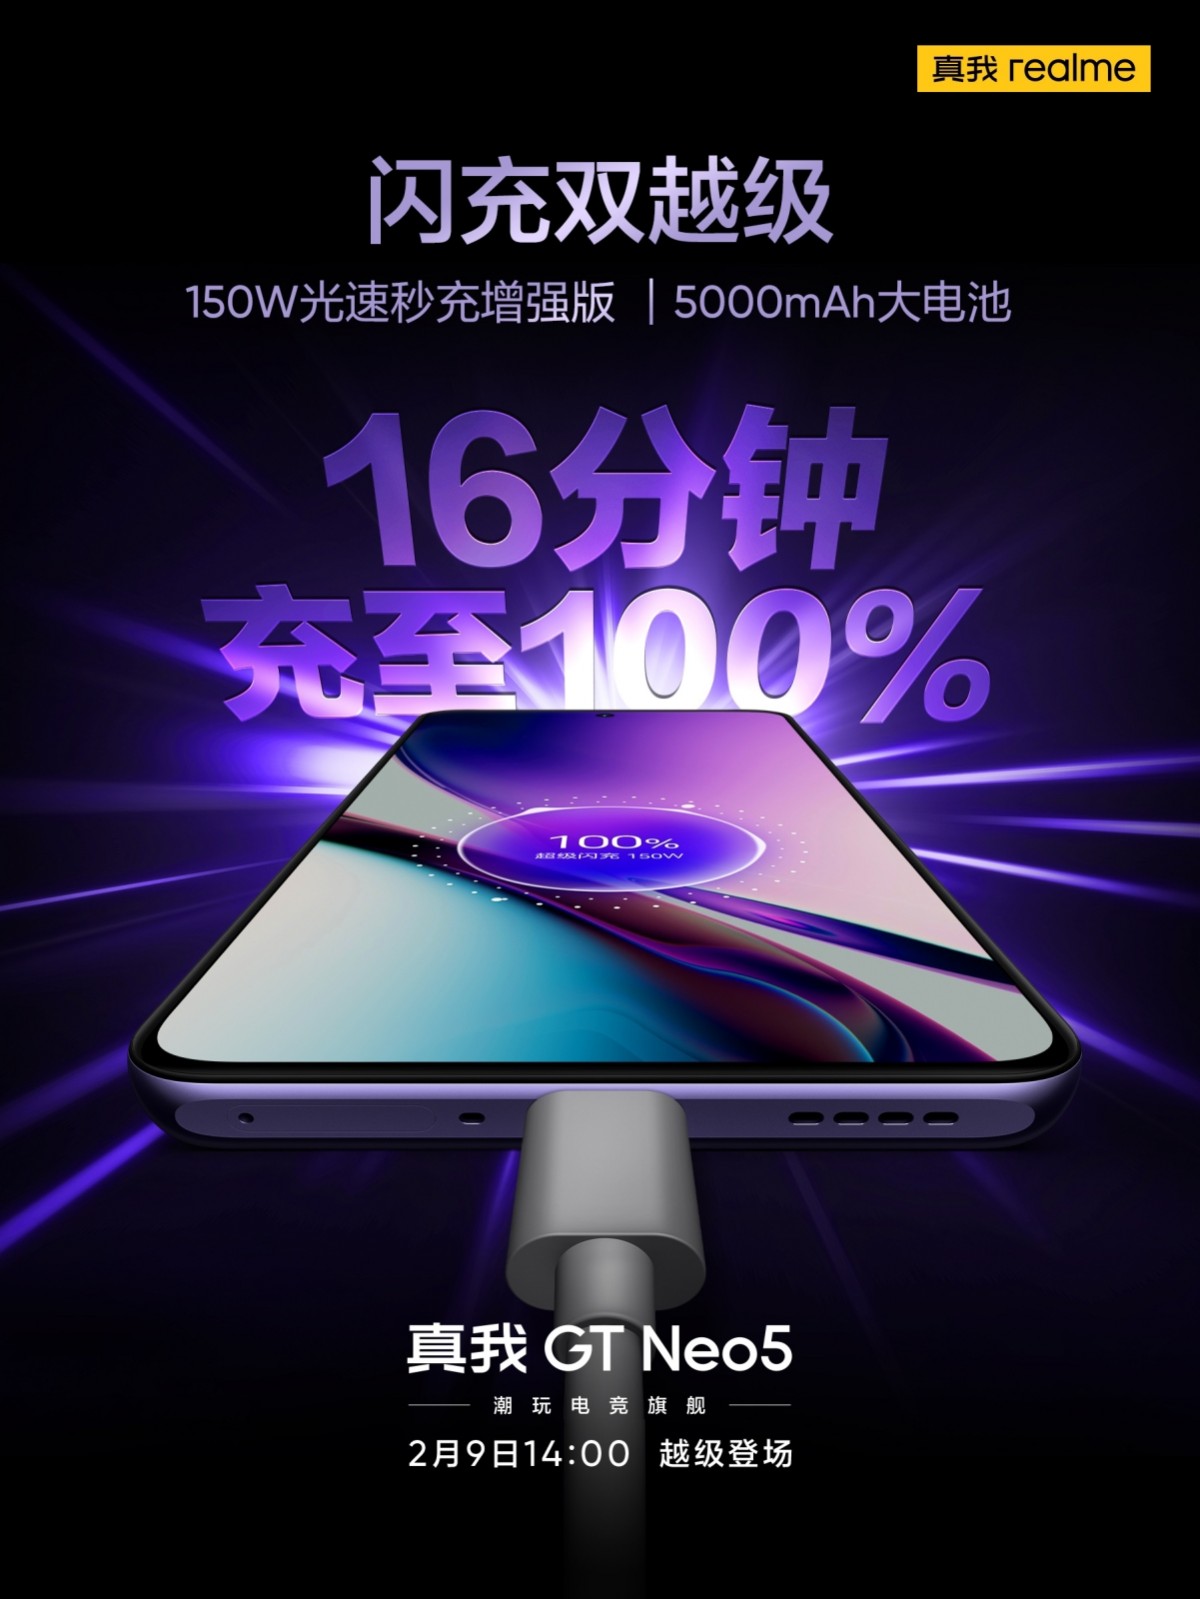 Realme confirms GT Neo 5 will have a 150W variant